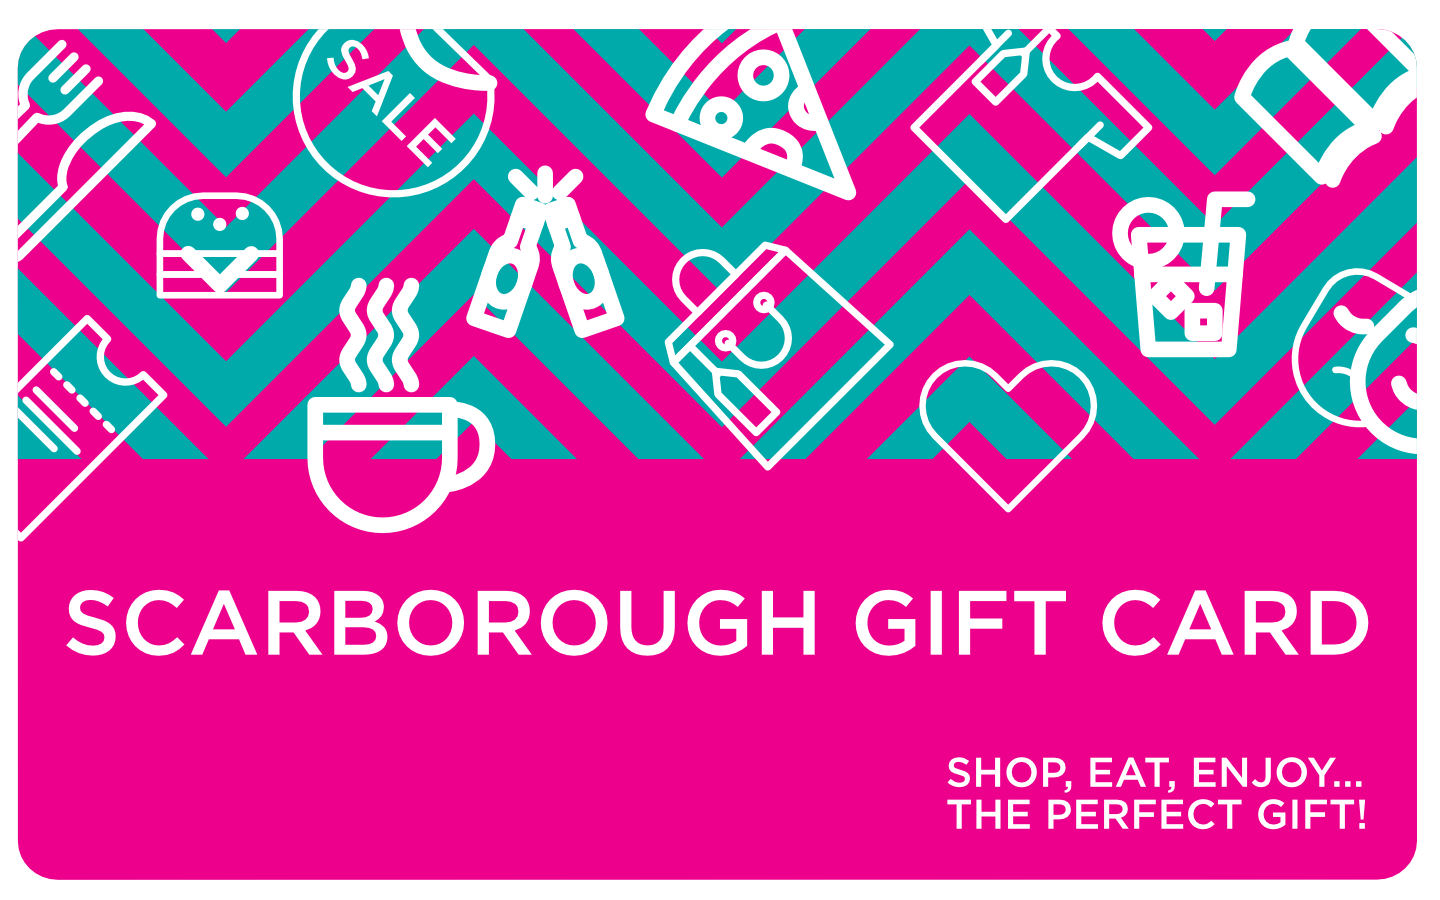 Scarborough gift card goes digital